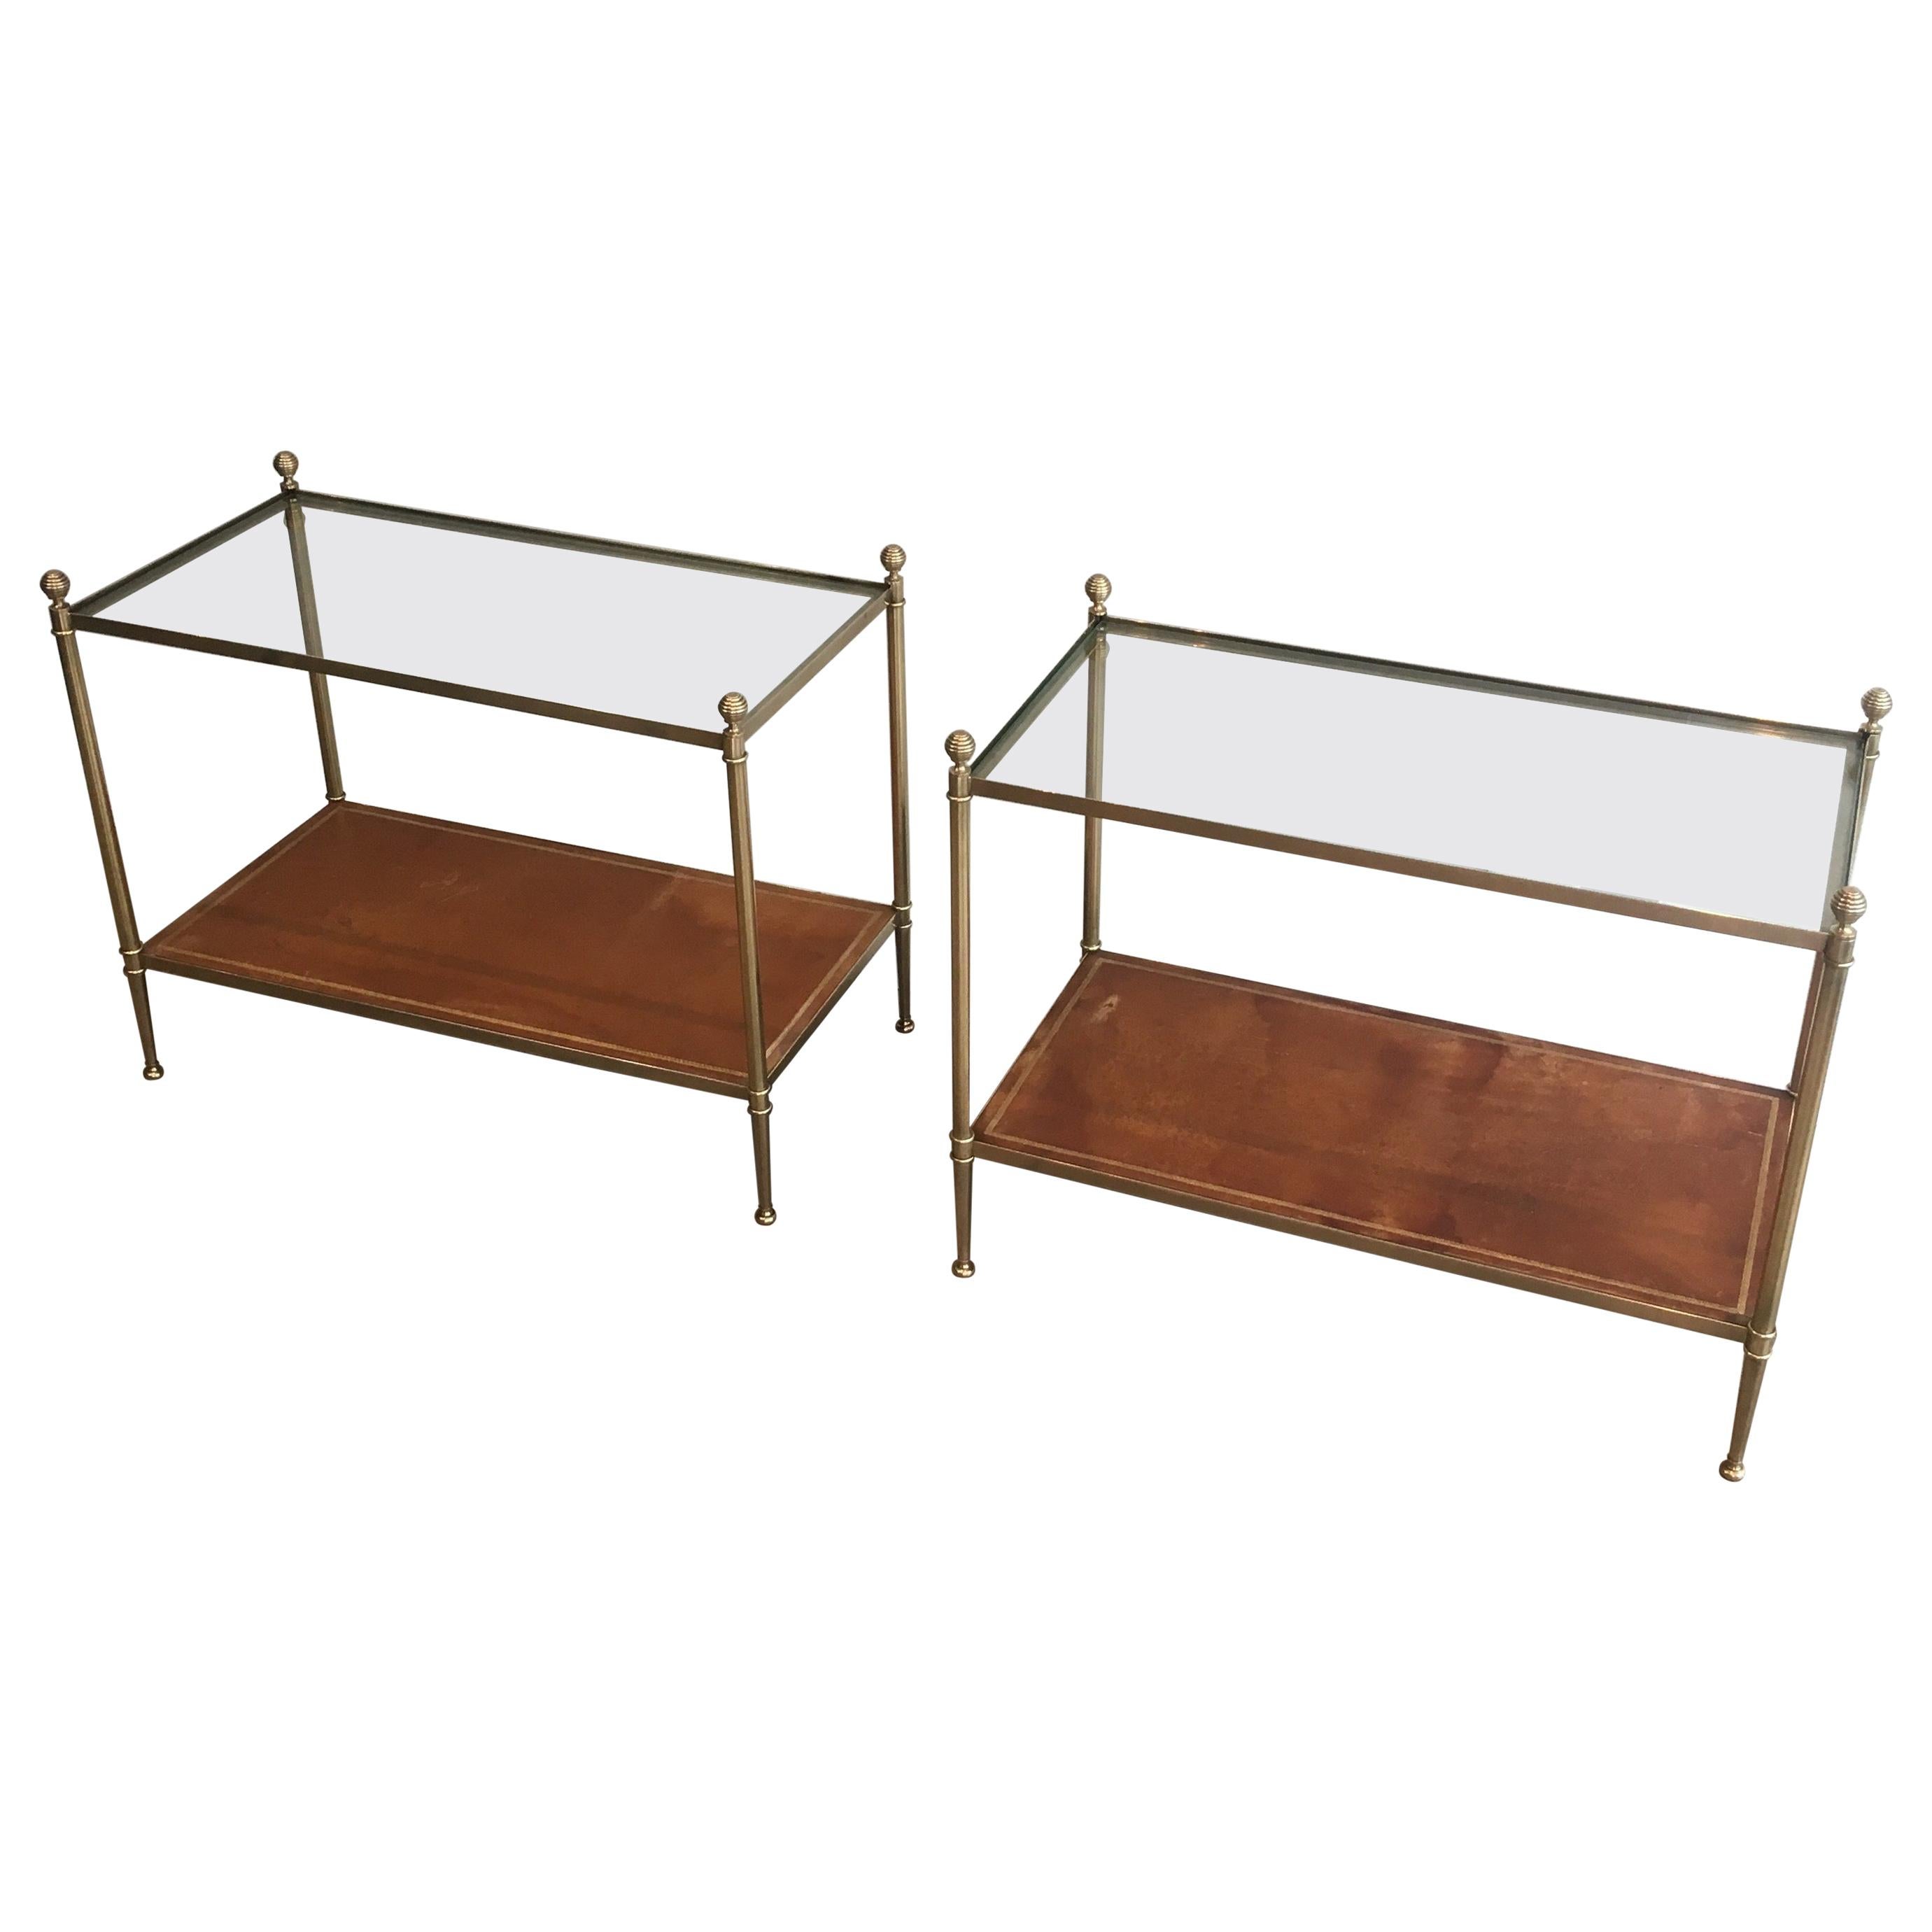 Maison Jansen, Pair of Neoclassical Style Brass, Leather and Glass Side Tables